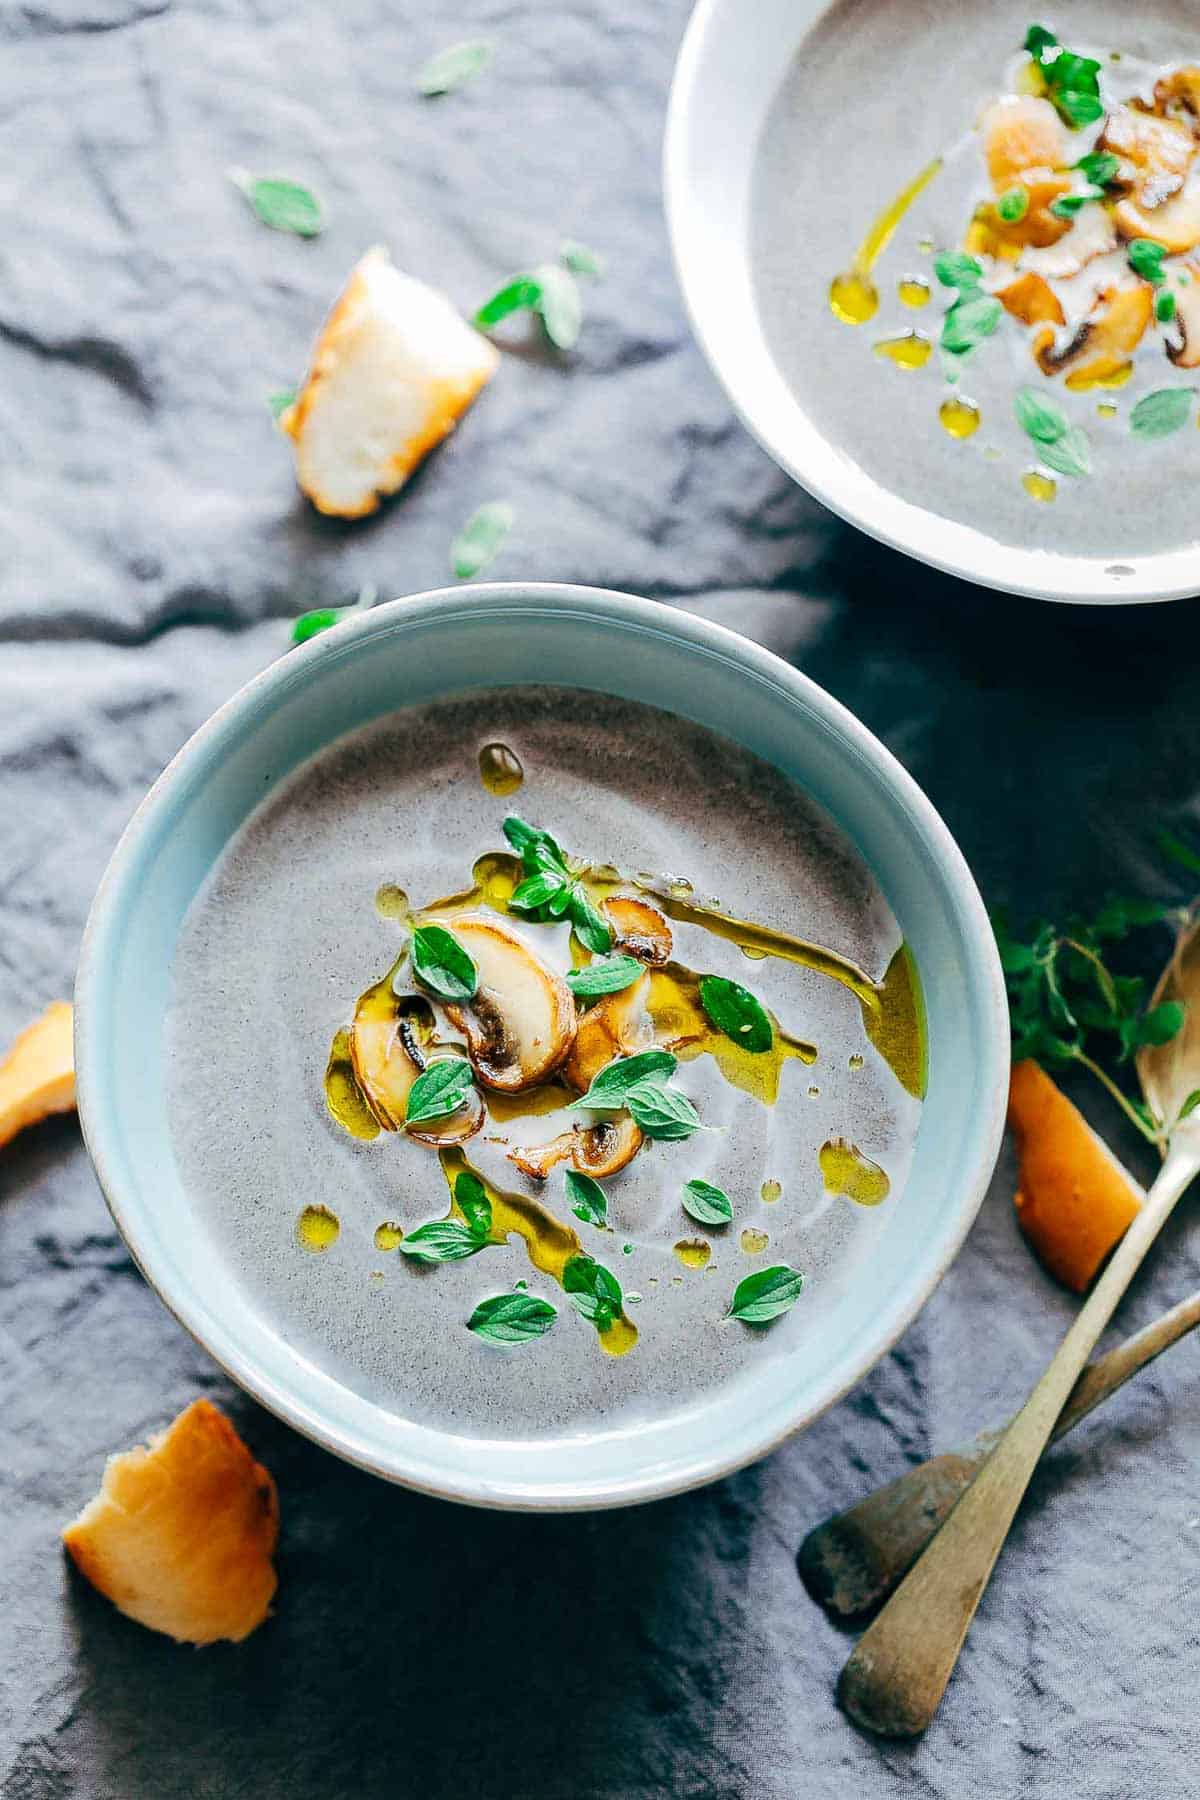 A picture of the Healthy Creamy Mushroom Soup served in a blue bowl.